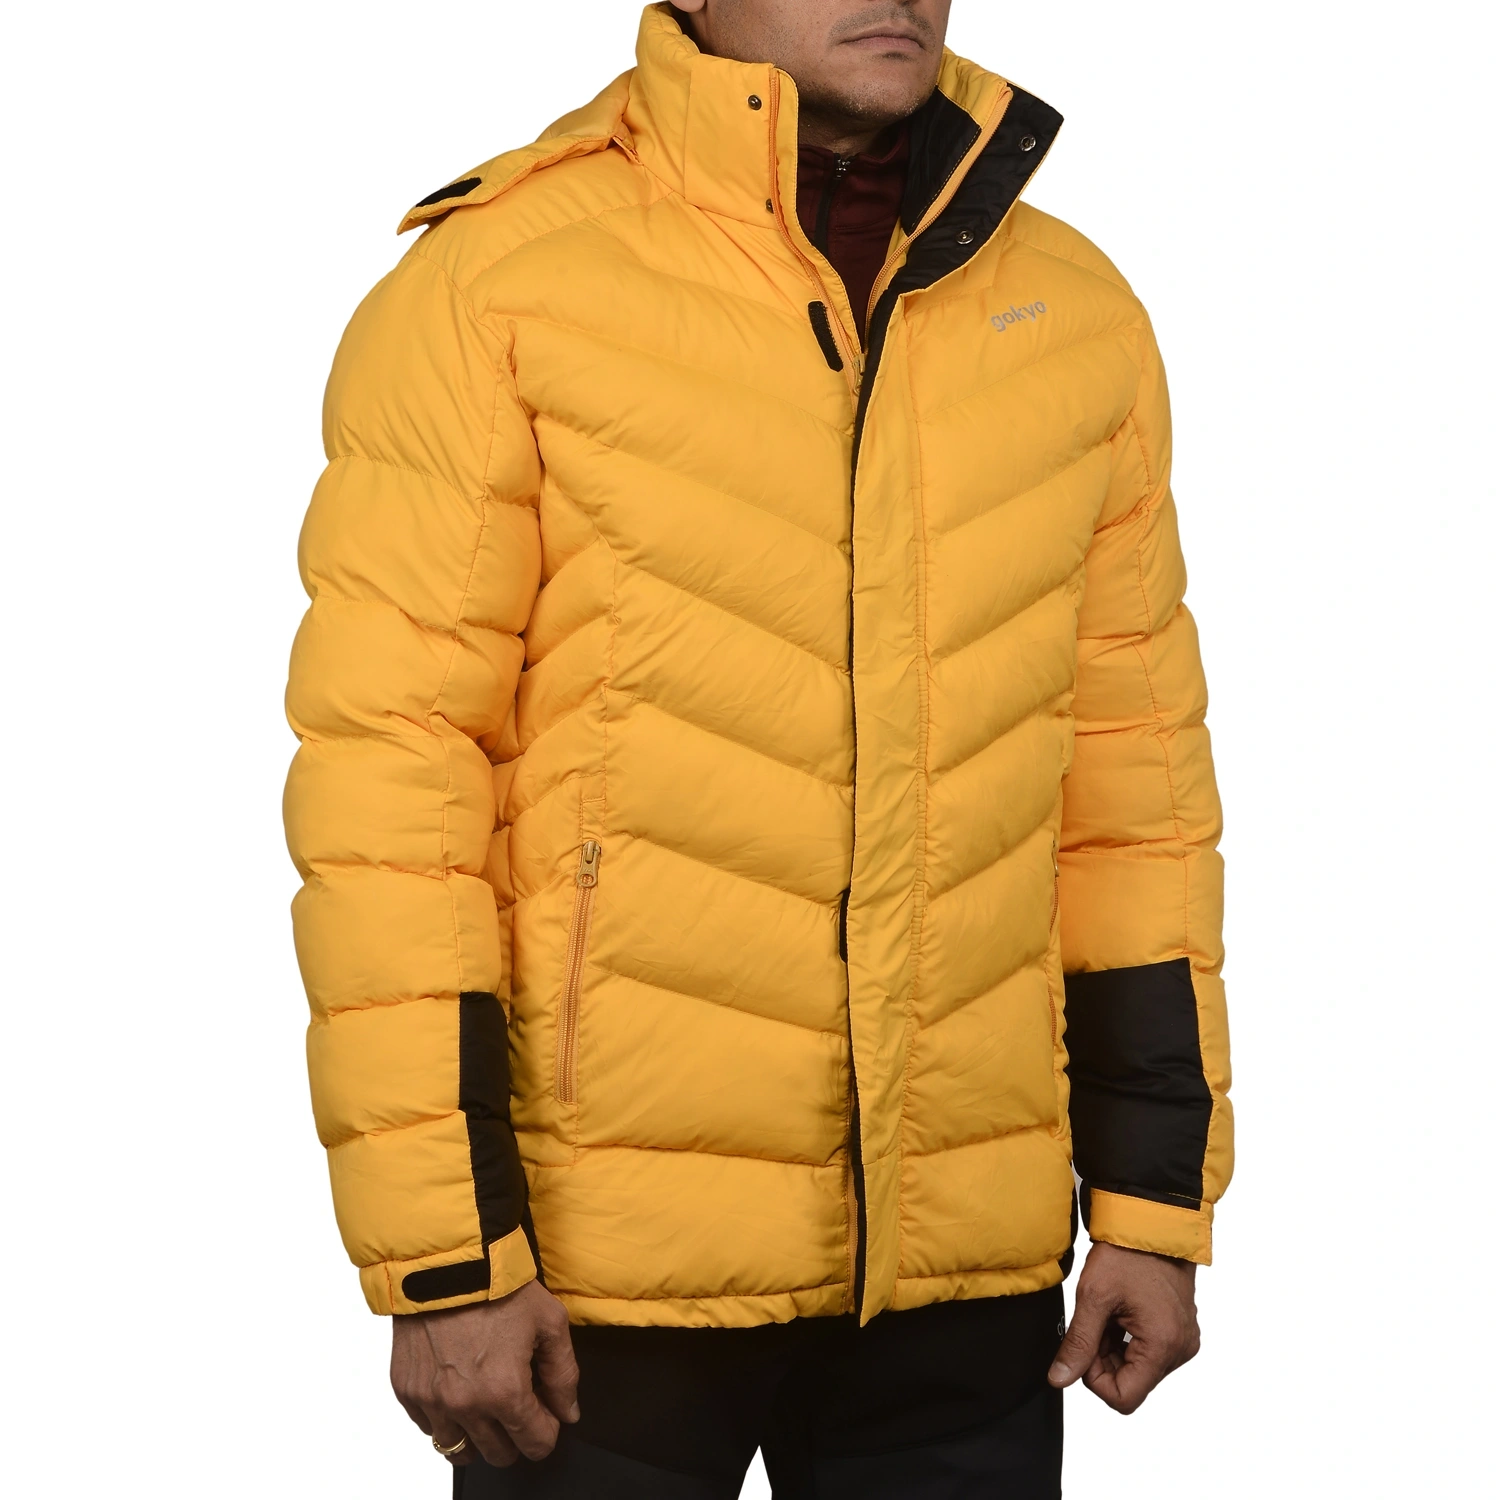 K2 Survivor Down Jacket for Men: Stylized Functionality for Extreme Cold Weather Expeditions (Up to -20°C)-S-Yellow-1